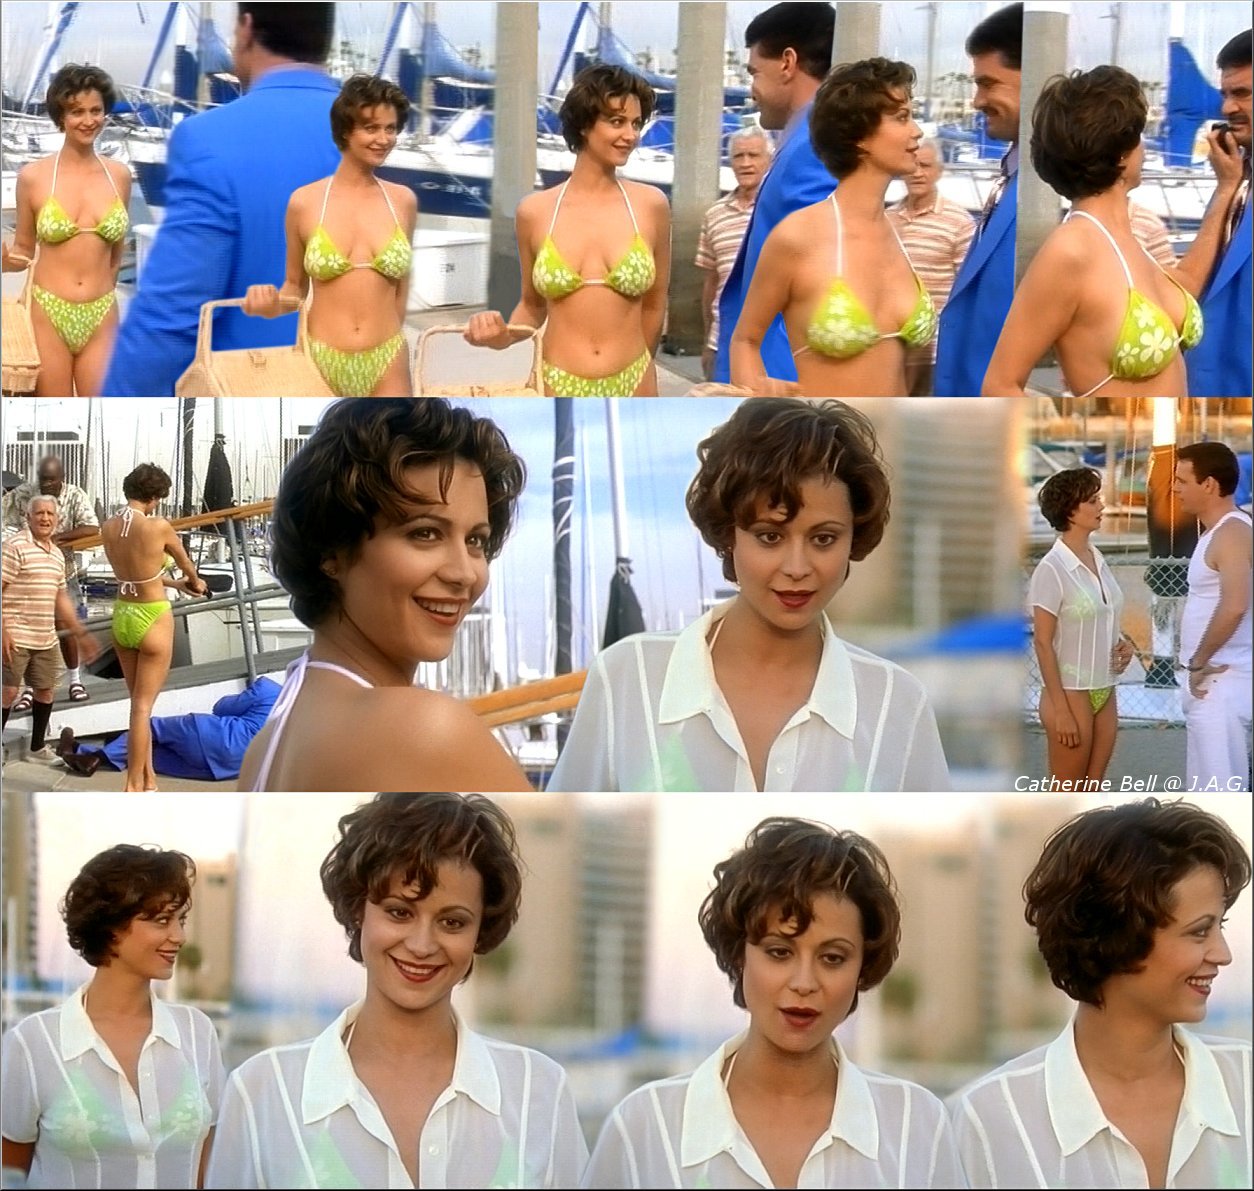 Catherine Bell nude pics.